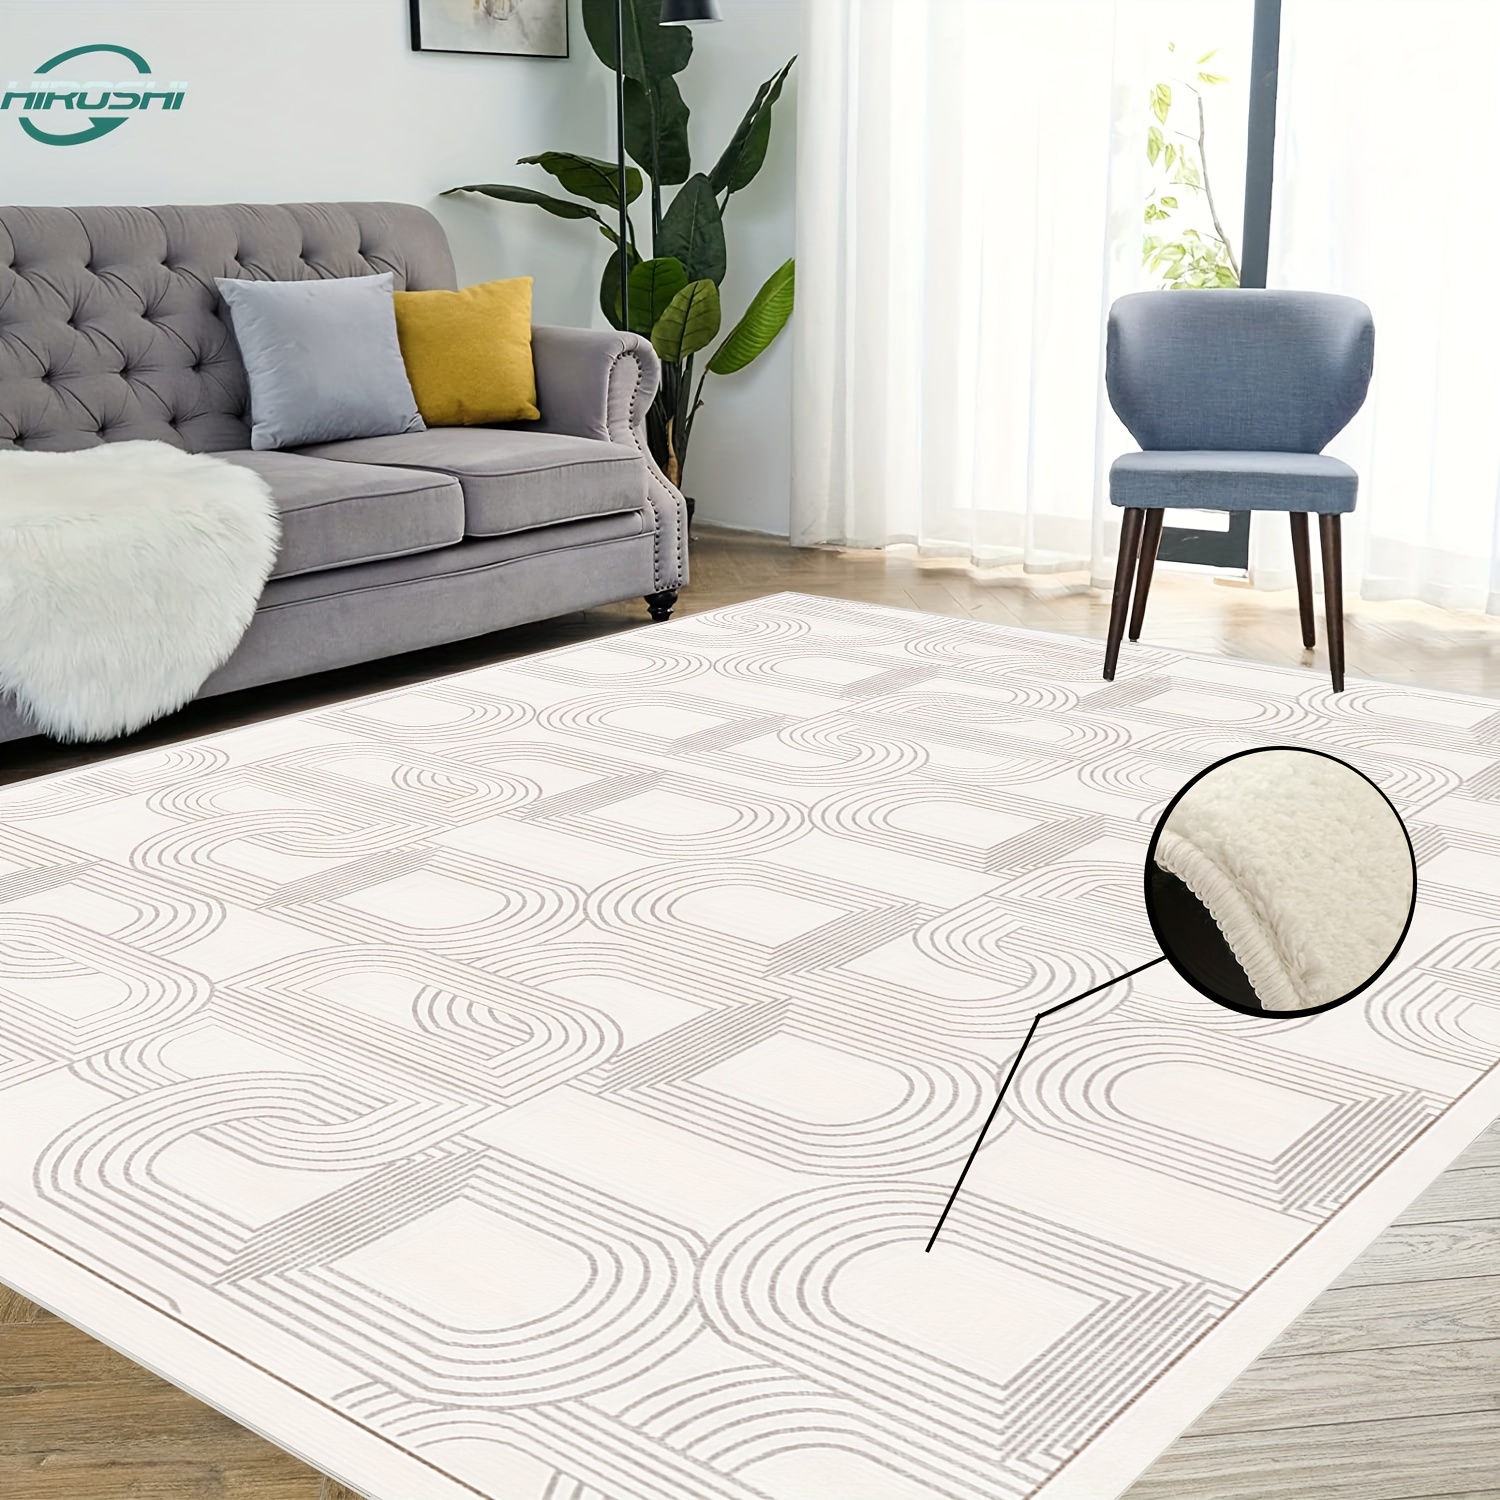  Short Pile Area Rug,DIY Cuttable Rug Geometric Accent Rug for  Home Kitchen Laundry Living Room,Soft Comfy Carpet Resist Dirt Non Slip  Entryway Rug Non Shedding Shaggy Floor Mat-G 100x120cm(39x47inch) : Home